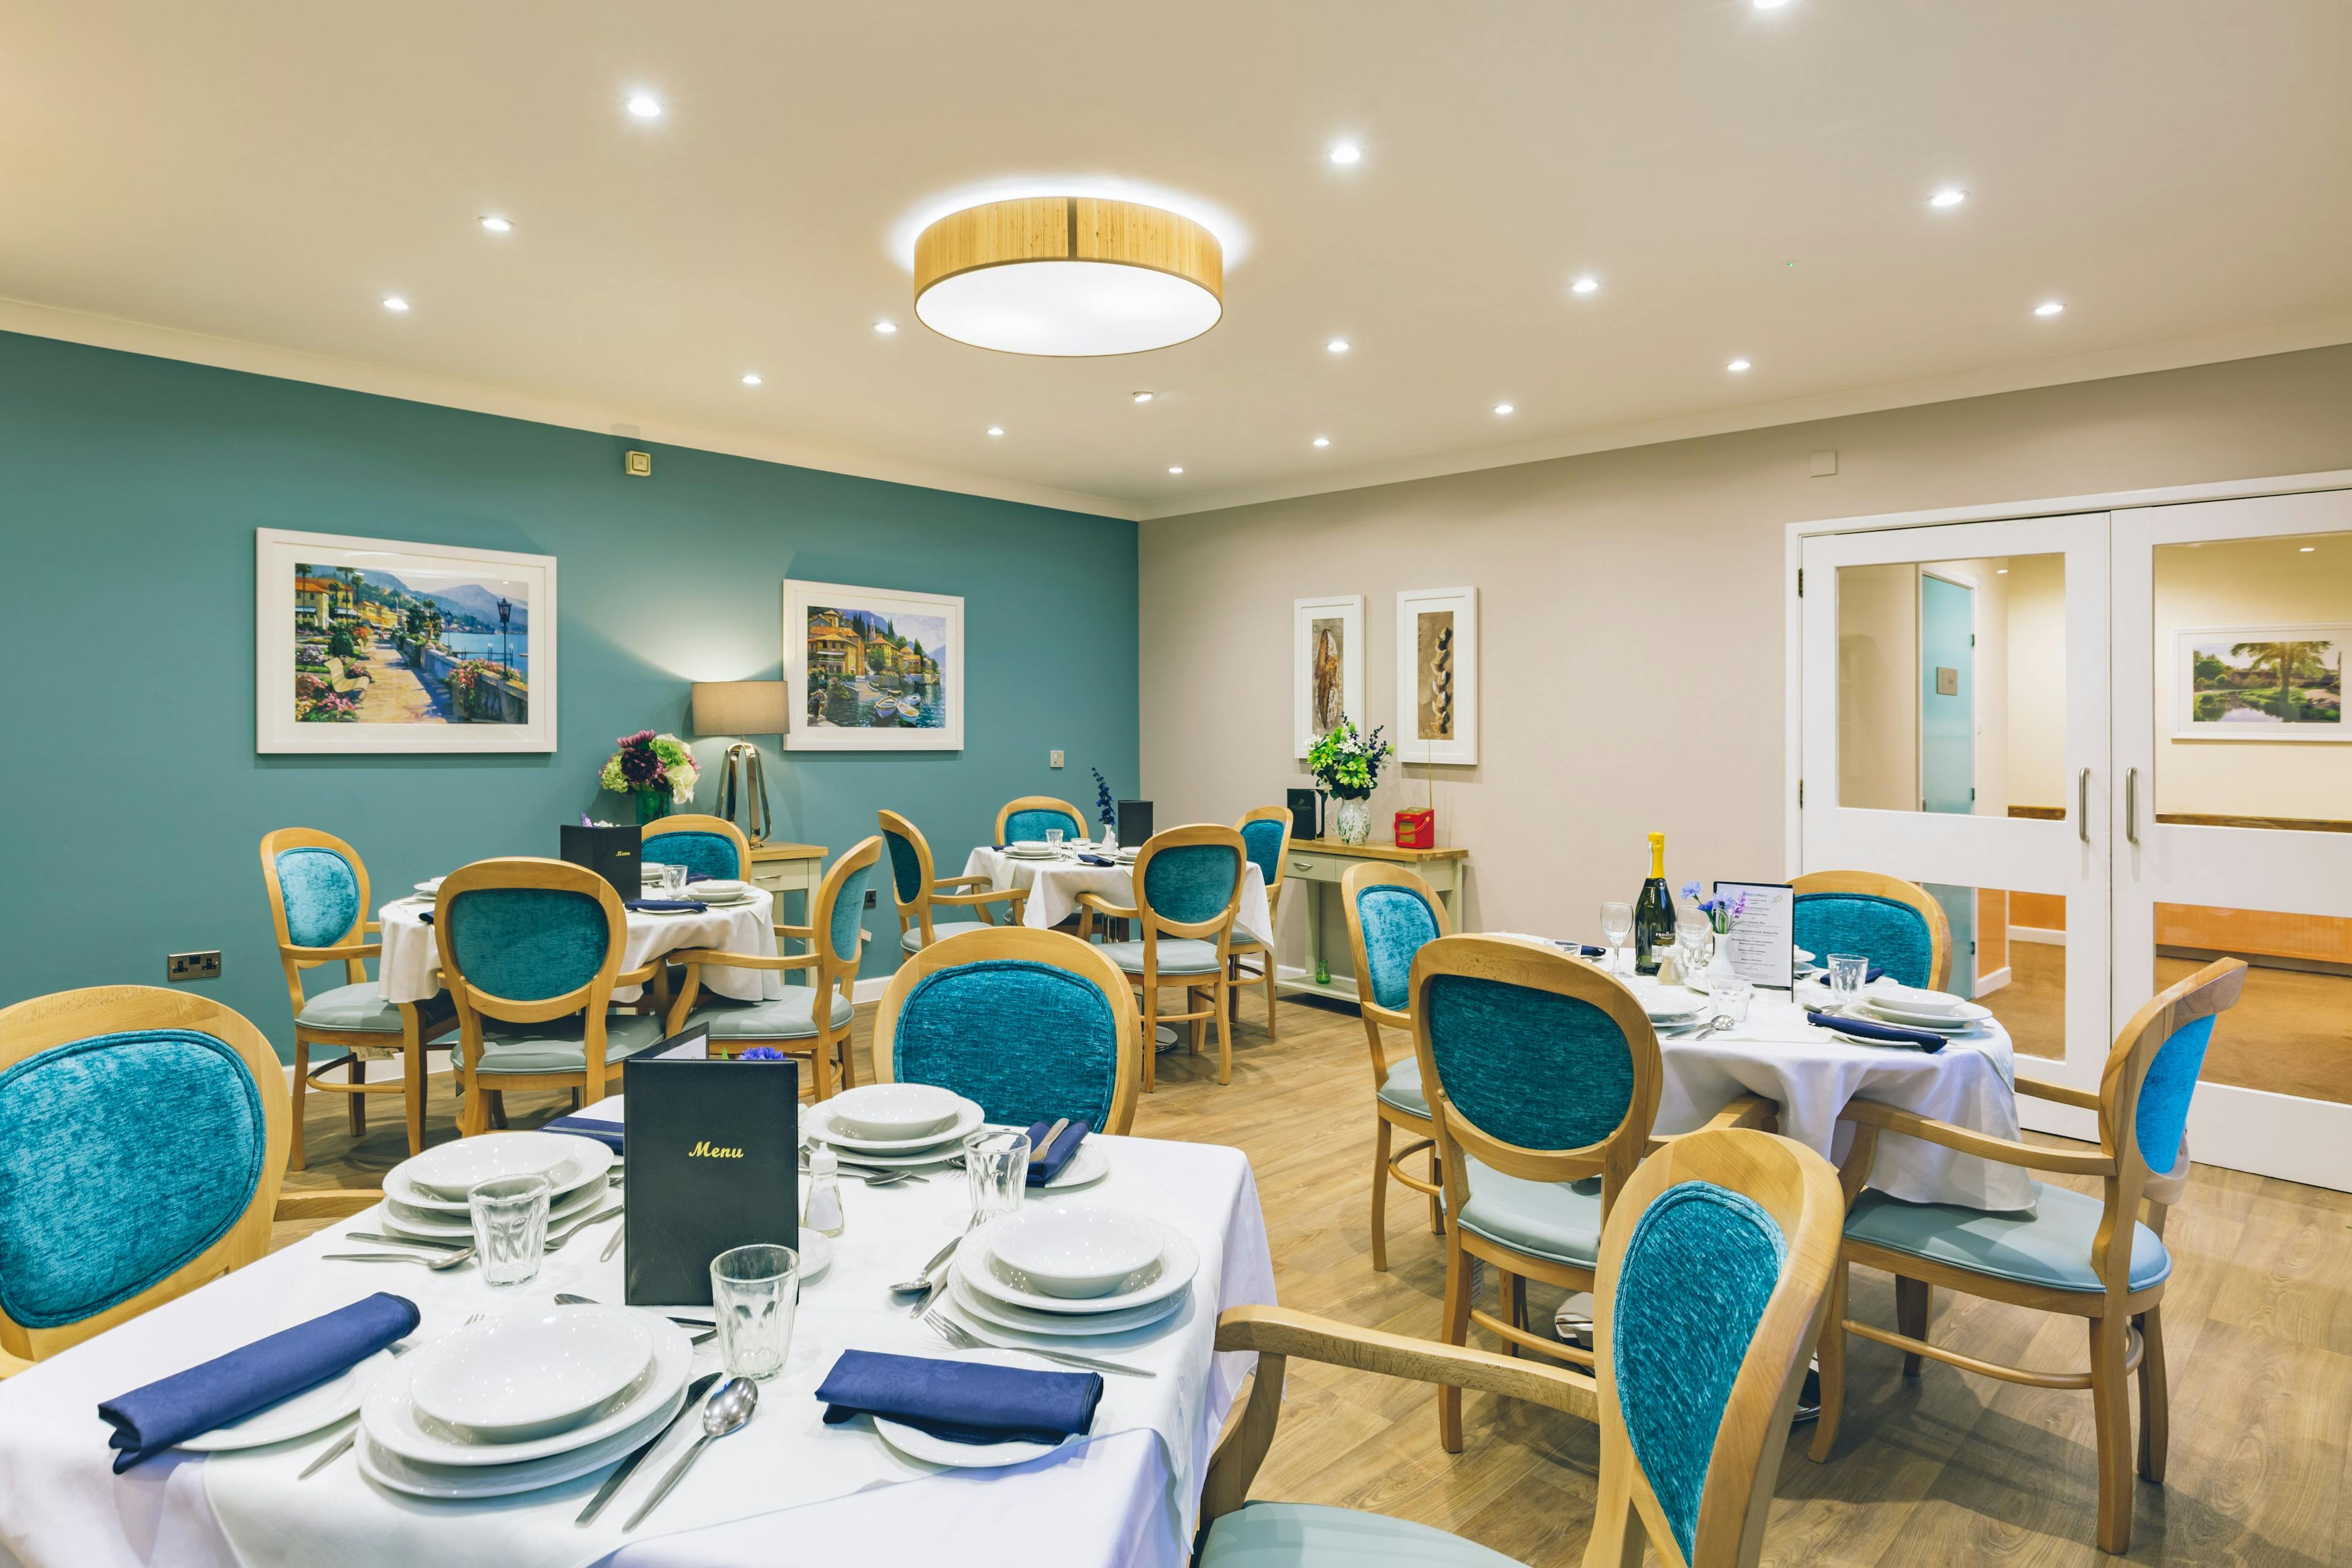 Dining Room of Vecta House Care Home in Newport, Isle of Wight